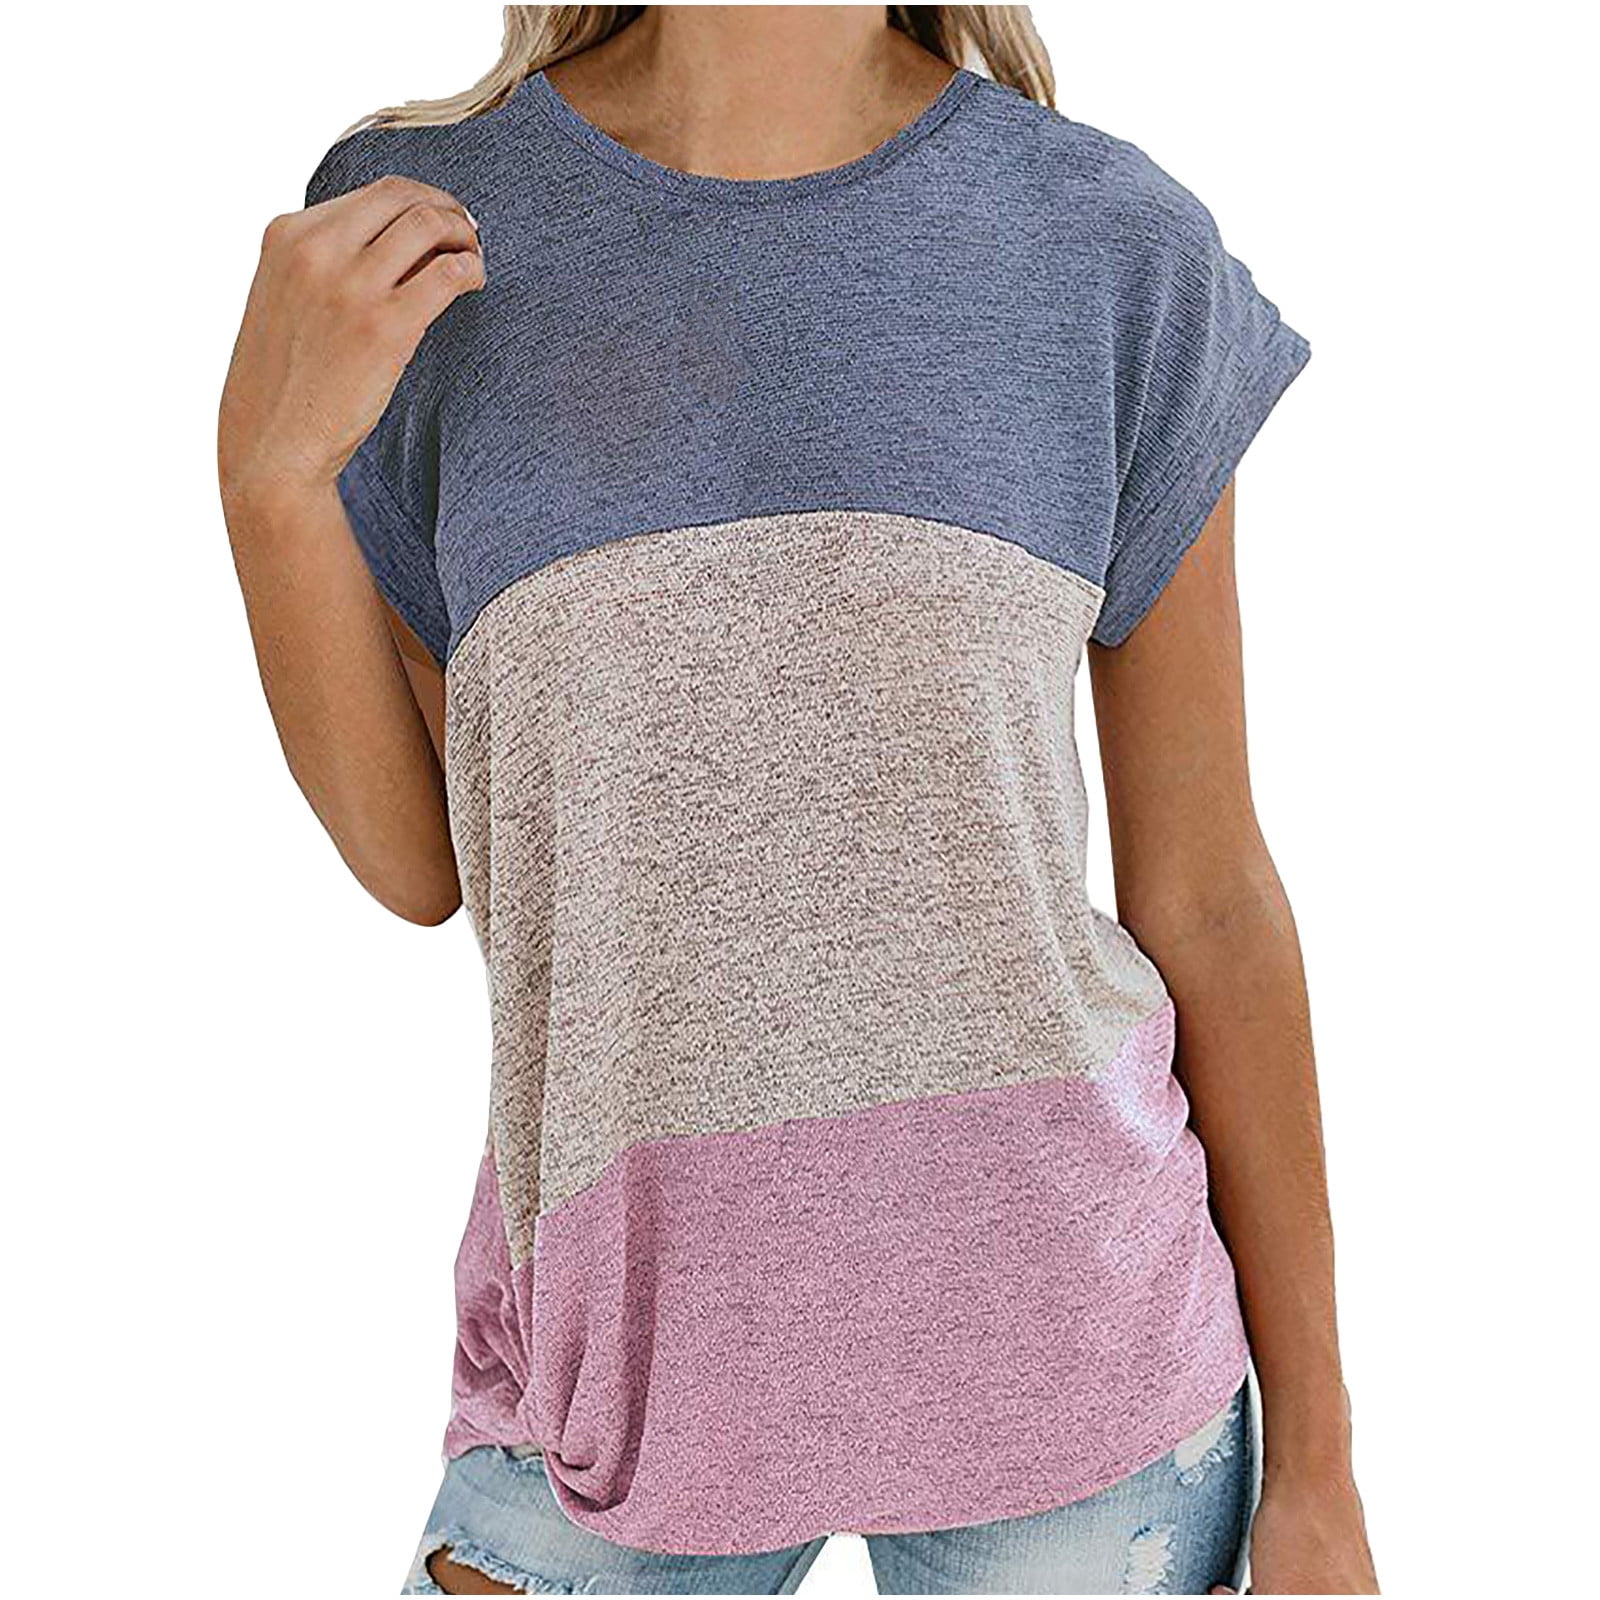 Fashion Women's Casual Short Sleeve Contrast Stitching O-Neck Shirt Loose Blouse